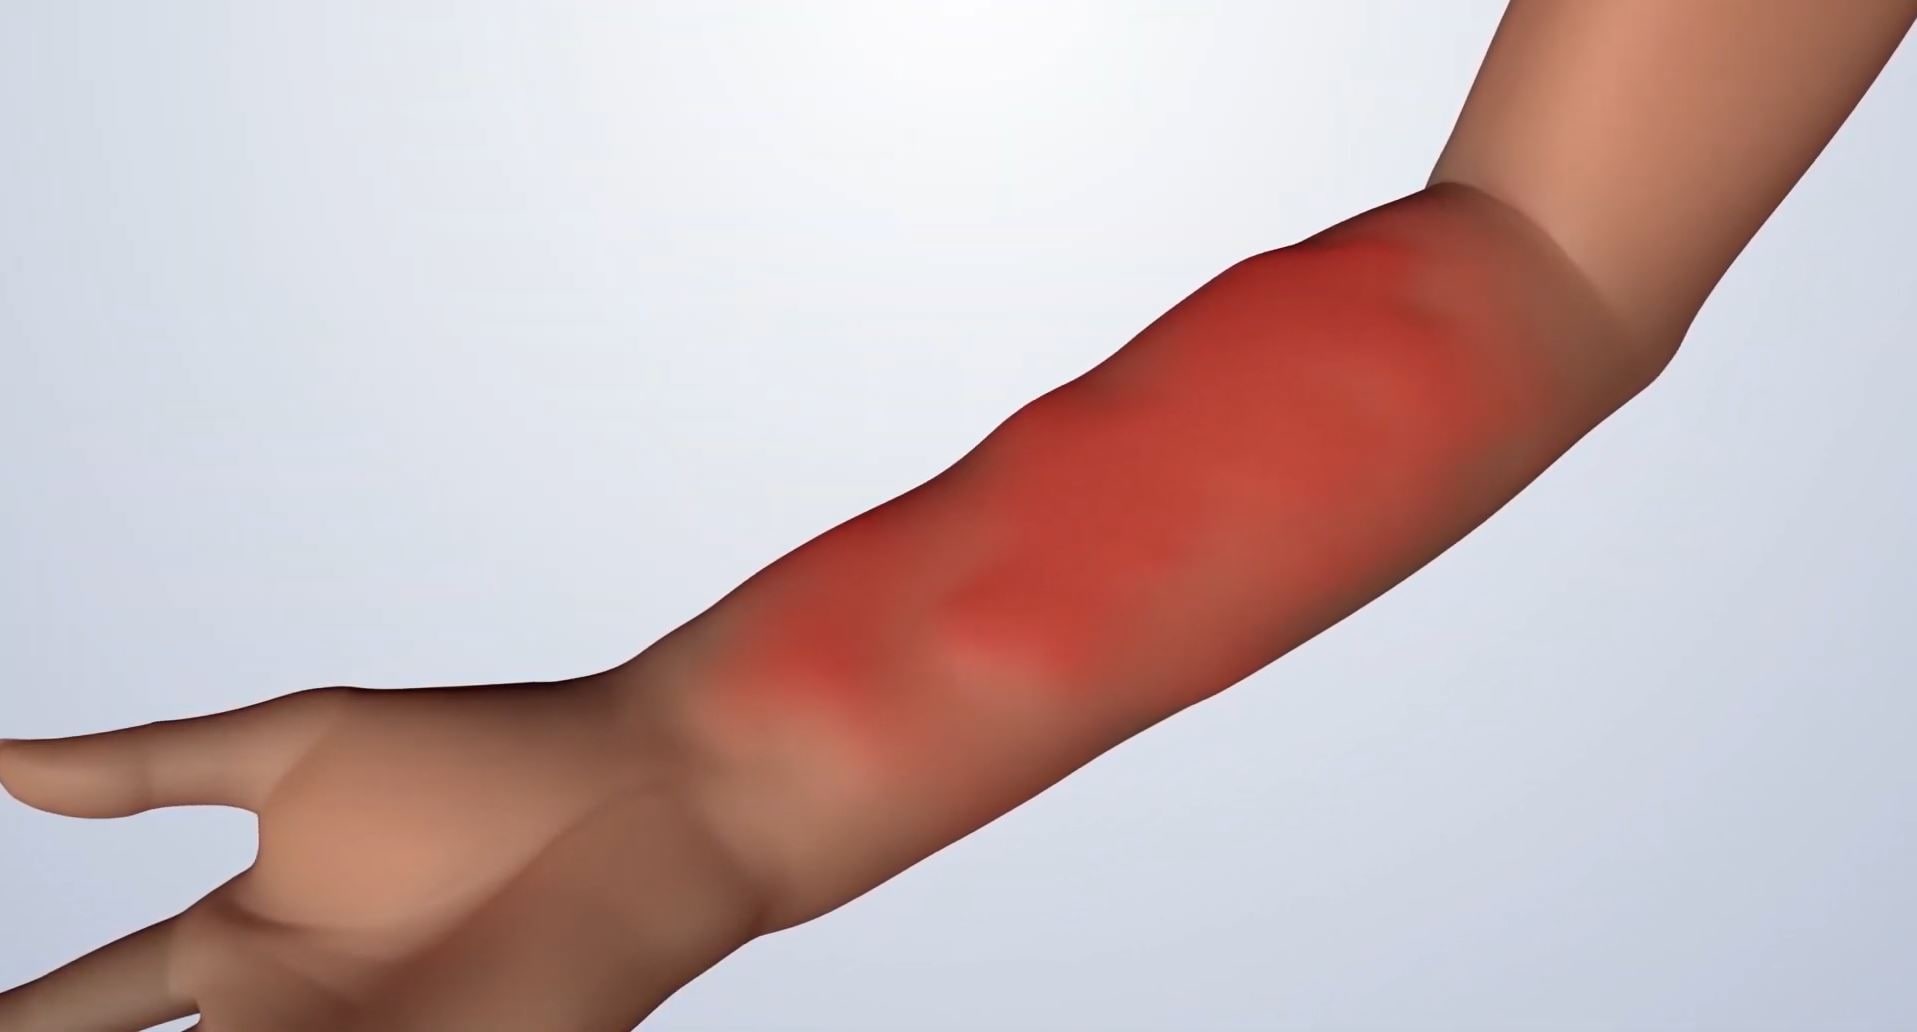 Arm with swelling and redness as a result of acute radiation syndrome